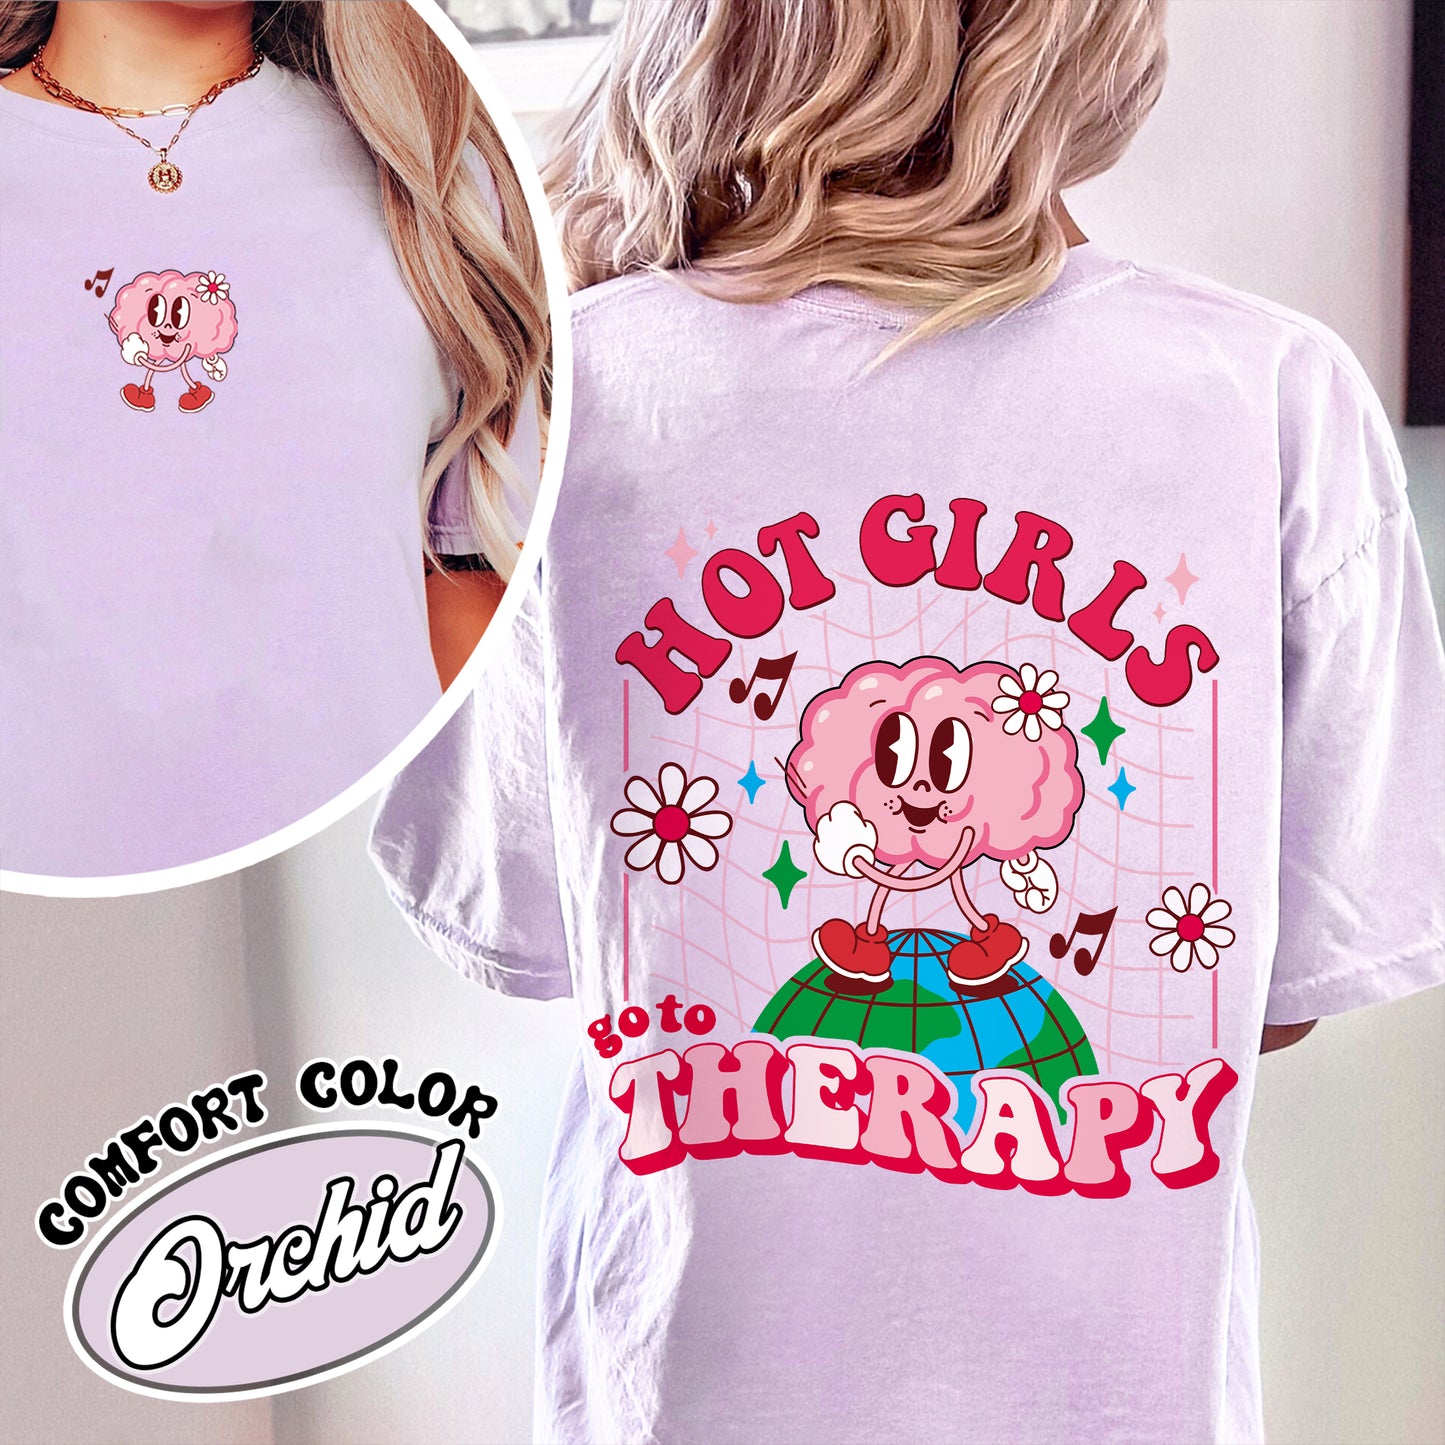 Mental Health Matters Comfort Color Shỉt, Funny Mental Health, Hot Girls Go to Therapy Shirt, Mental Health Shirt Feelings Matter, Therapy Shirt